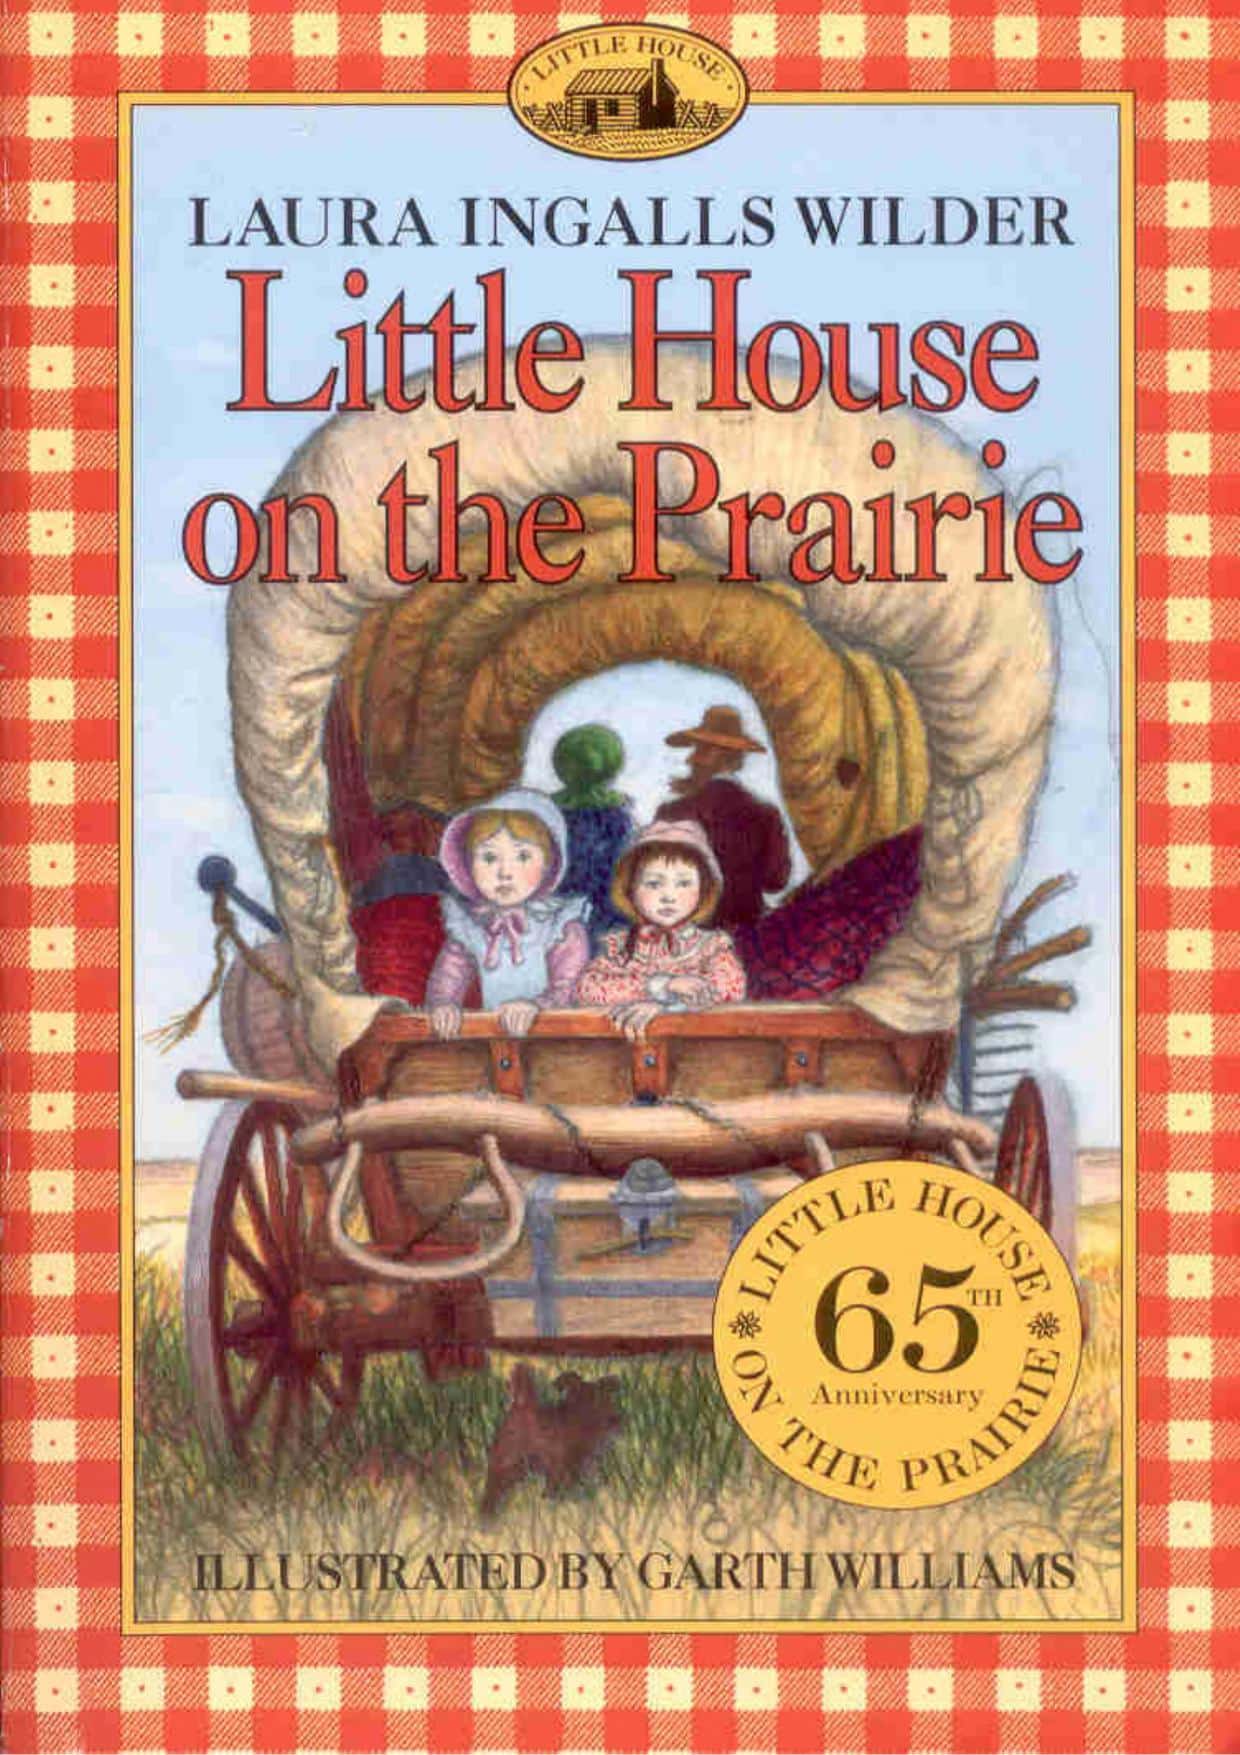 The cover art for the book "Little House on the Prairie" by Laura Ingalls Wilder